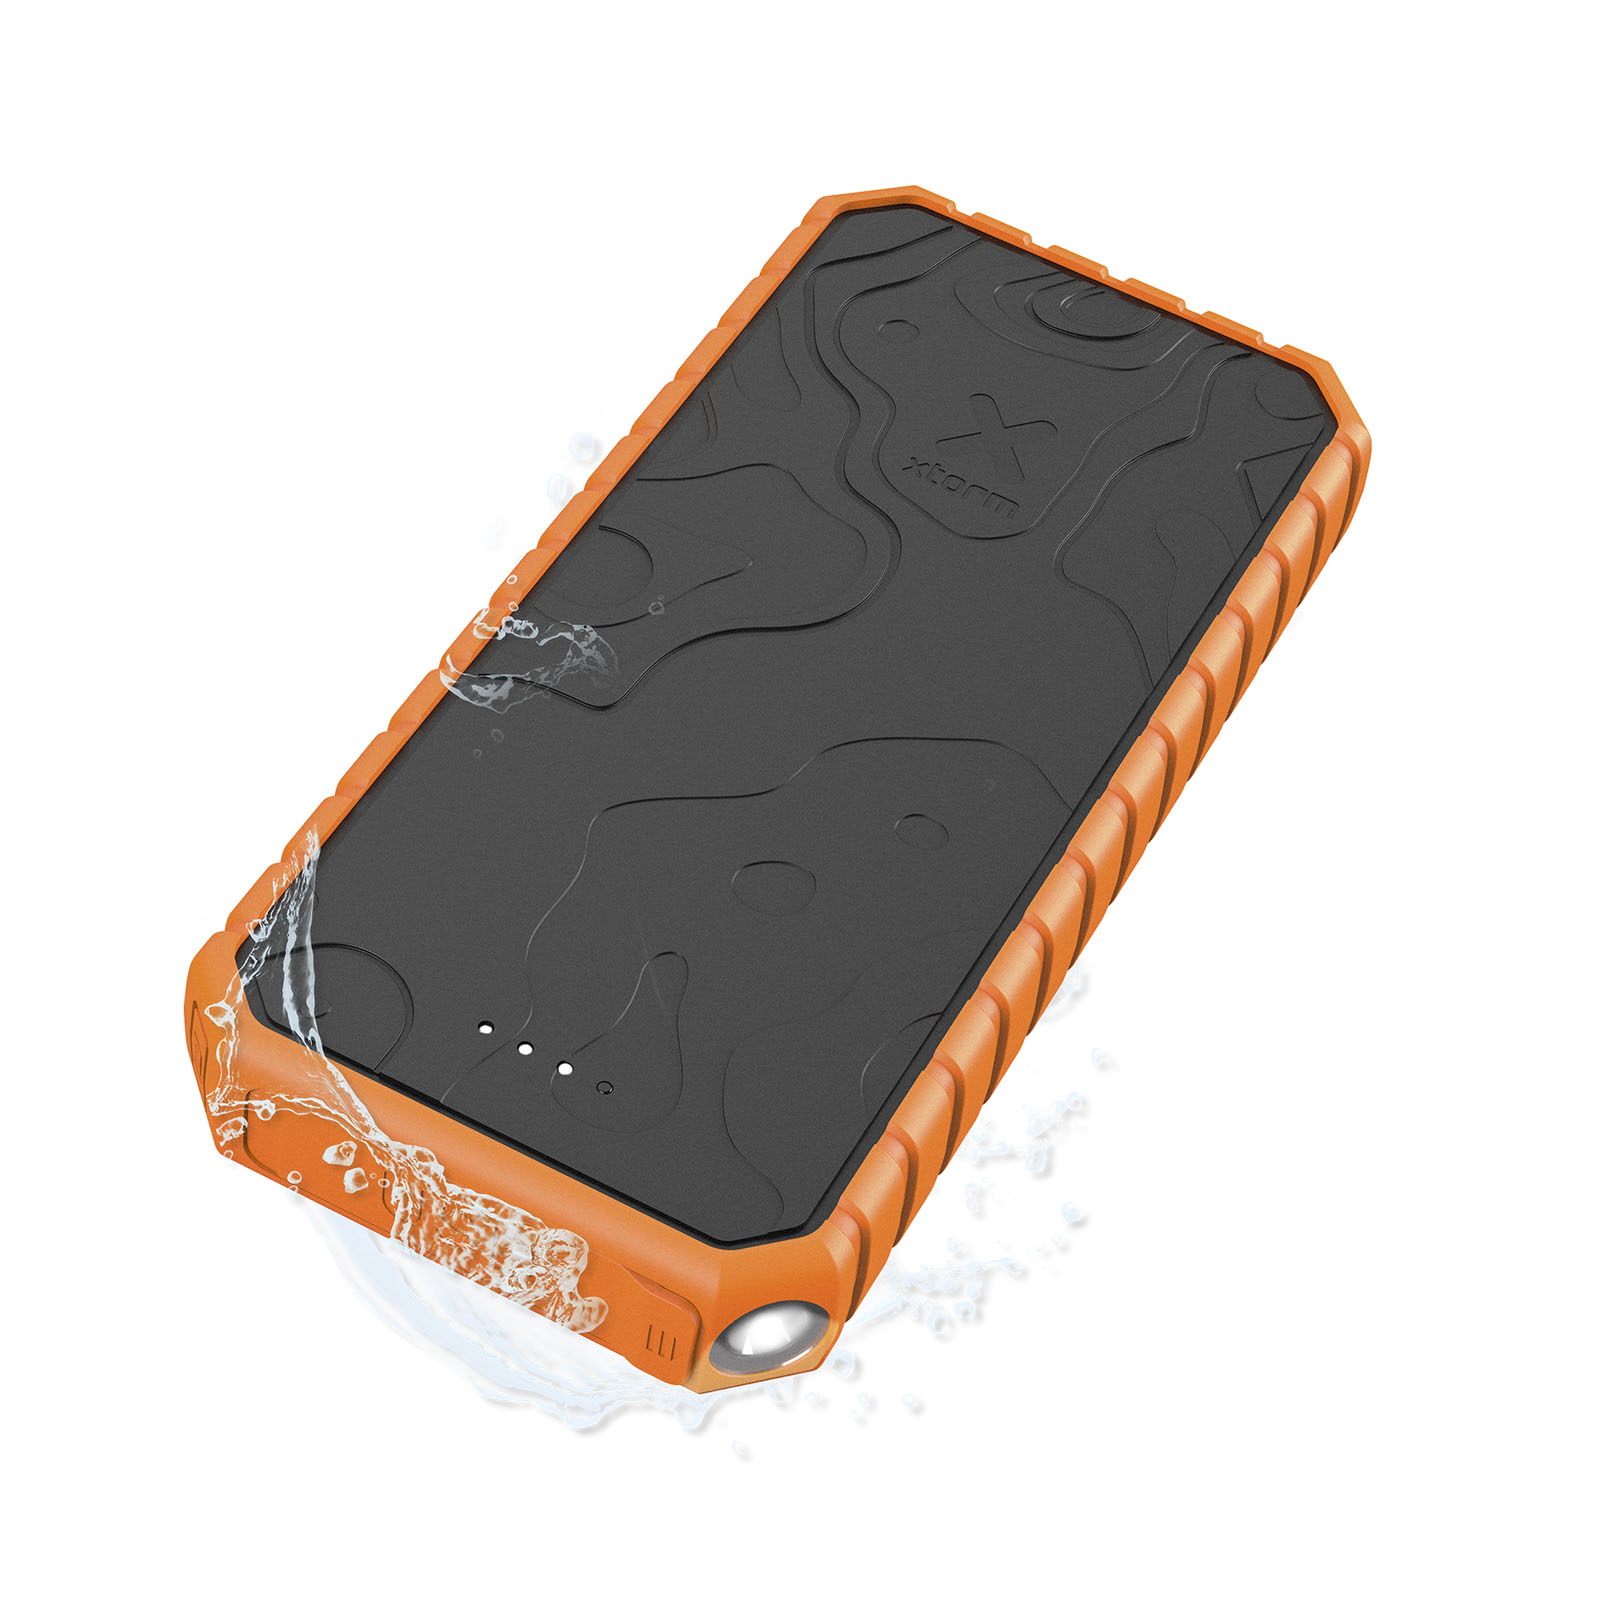 Advertising Powerbanks - Xtorm XR202 Xtreme 20.000 mAh 35W QC3.0 waterproof rugged power bank with torch - 5